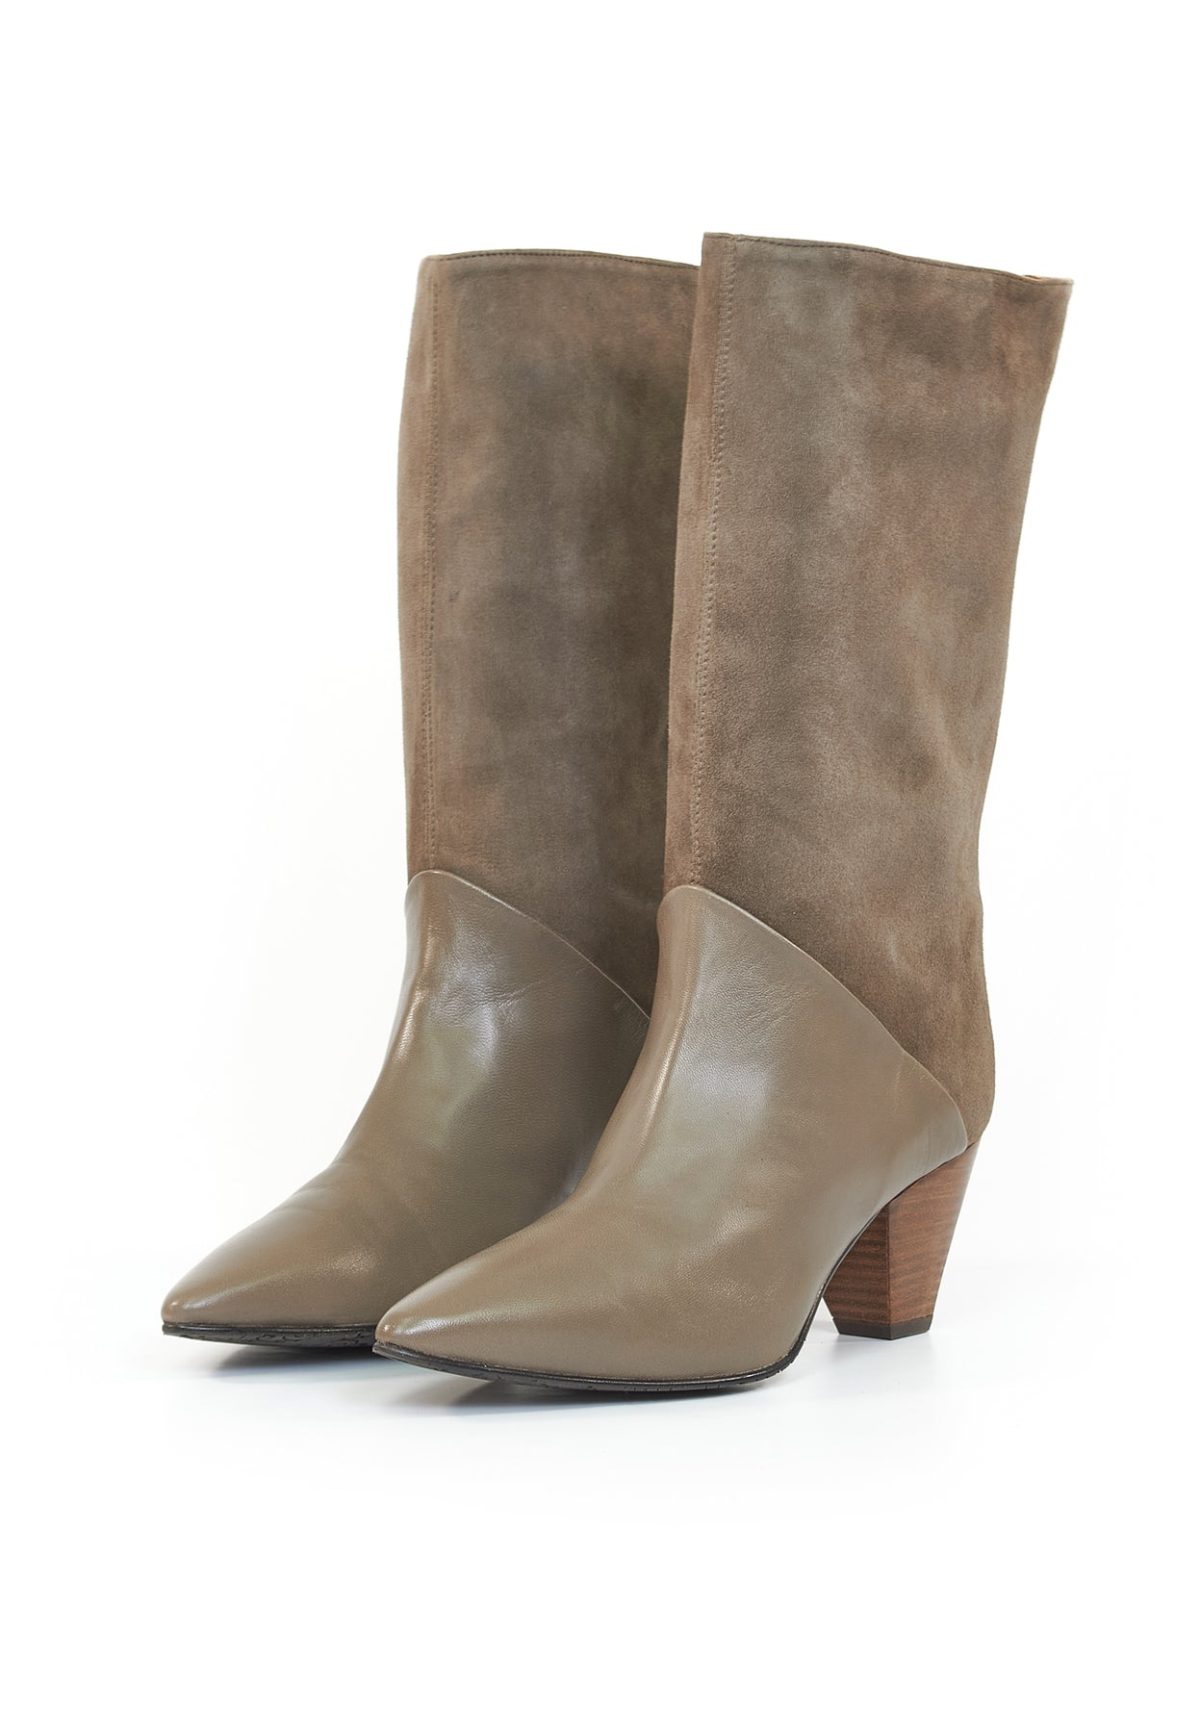 Brenda Zaro 4471 Dijon Taupe Suede and Nappa Leather Boots